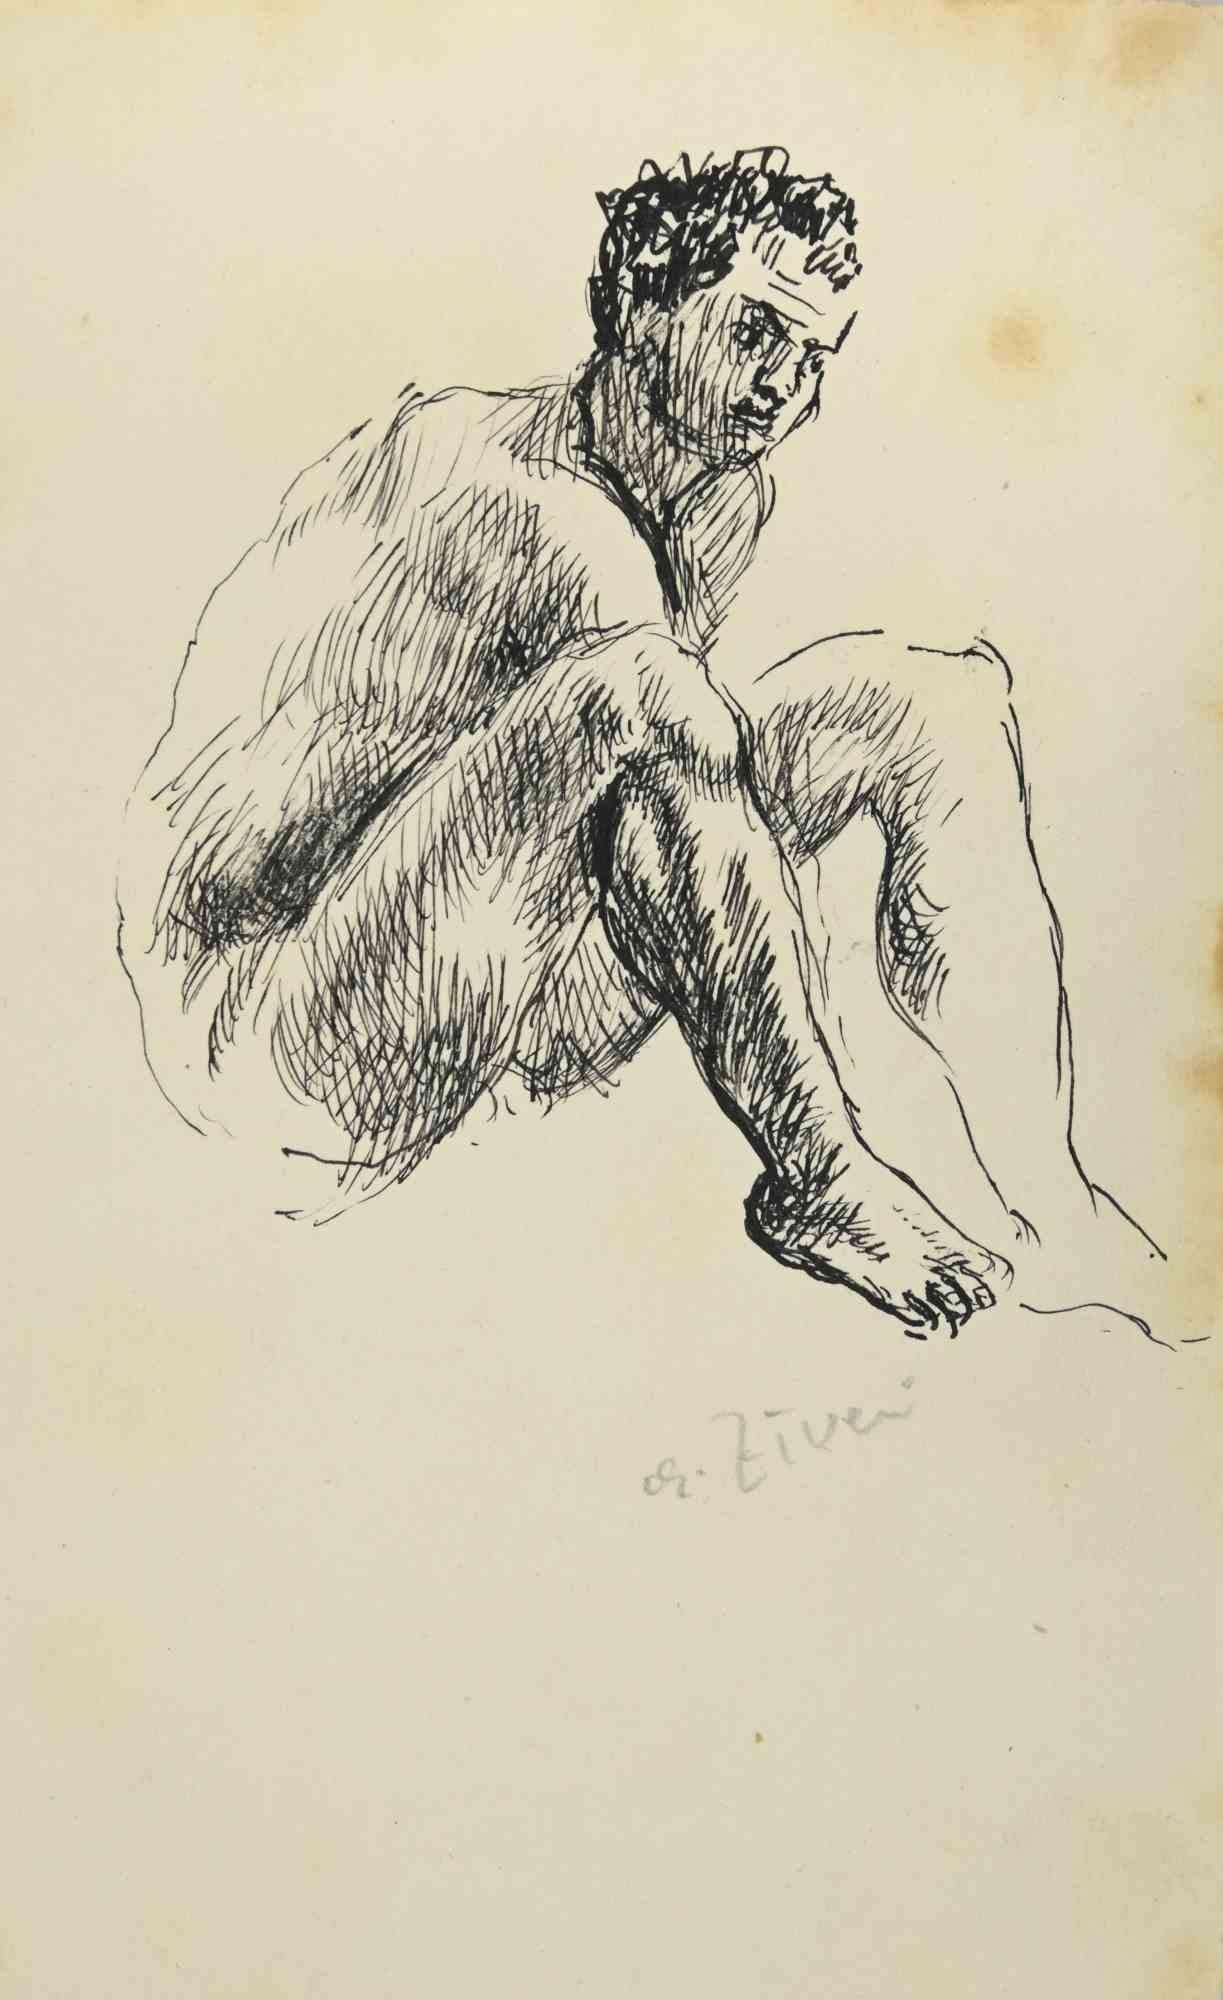 The Nude Man is a drawing realized by Alberto Ziveri in 1930s

Ink on paper.

The artwork is represented through deft strokes masterly.

Alberto Ziveri (Rome,1908 – 1990), the Italian painter of the Roman school, author of urban landscapes and